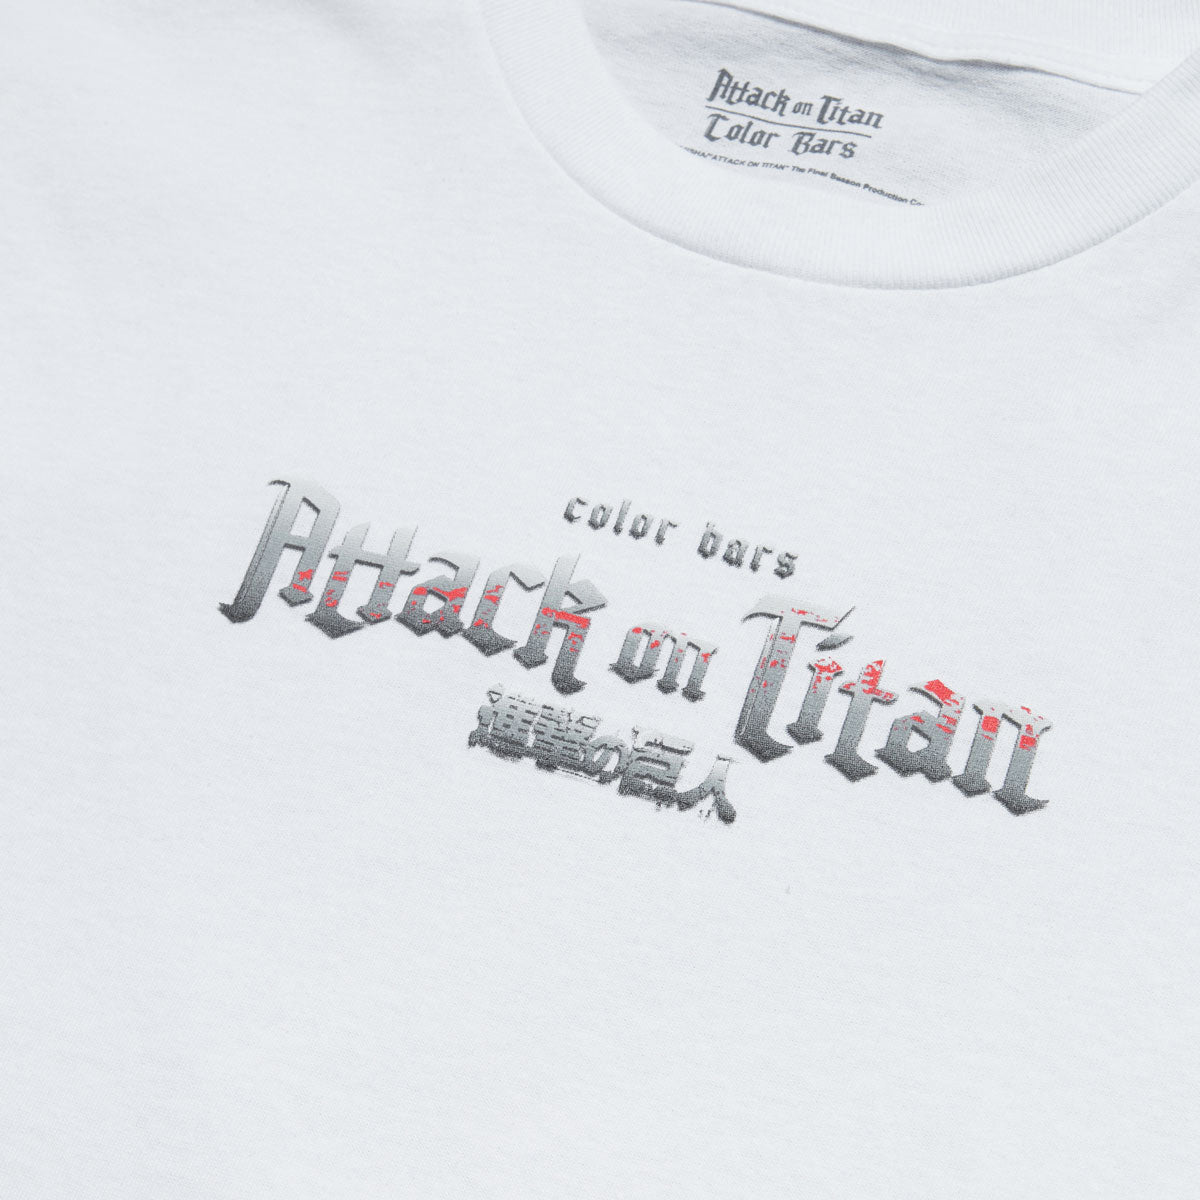 Color Bars x Attack on Titan Back to Back T-Shirt - White image 3